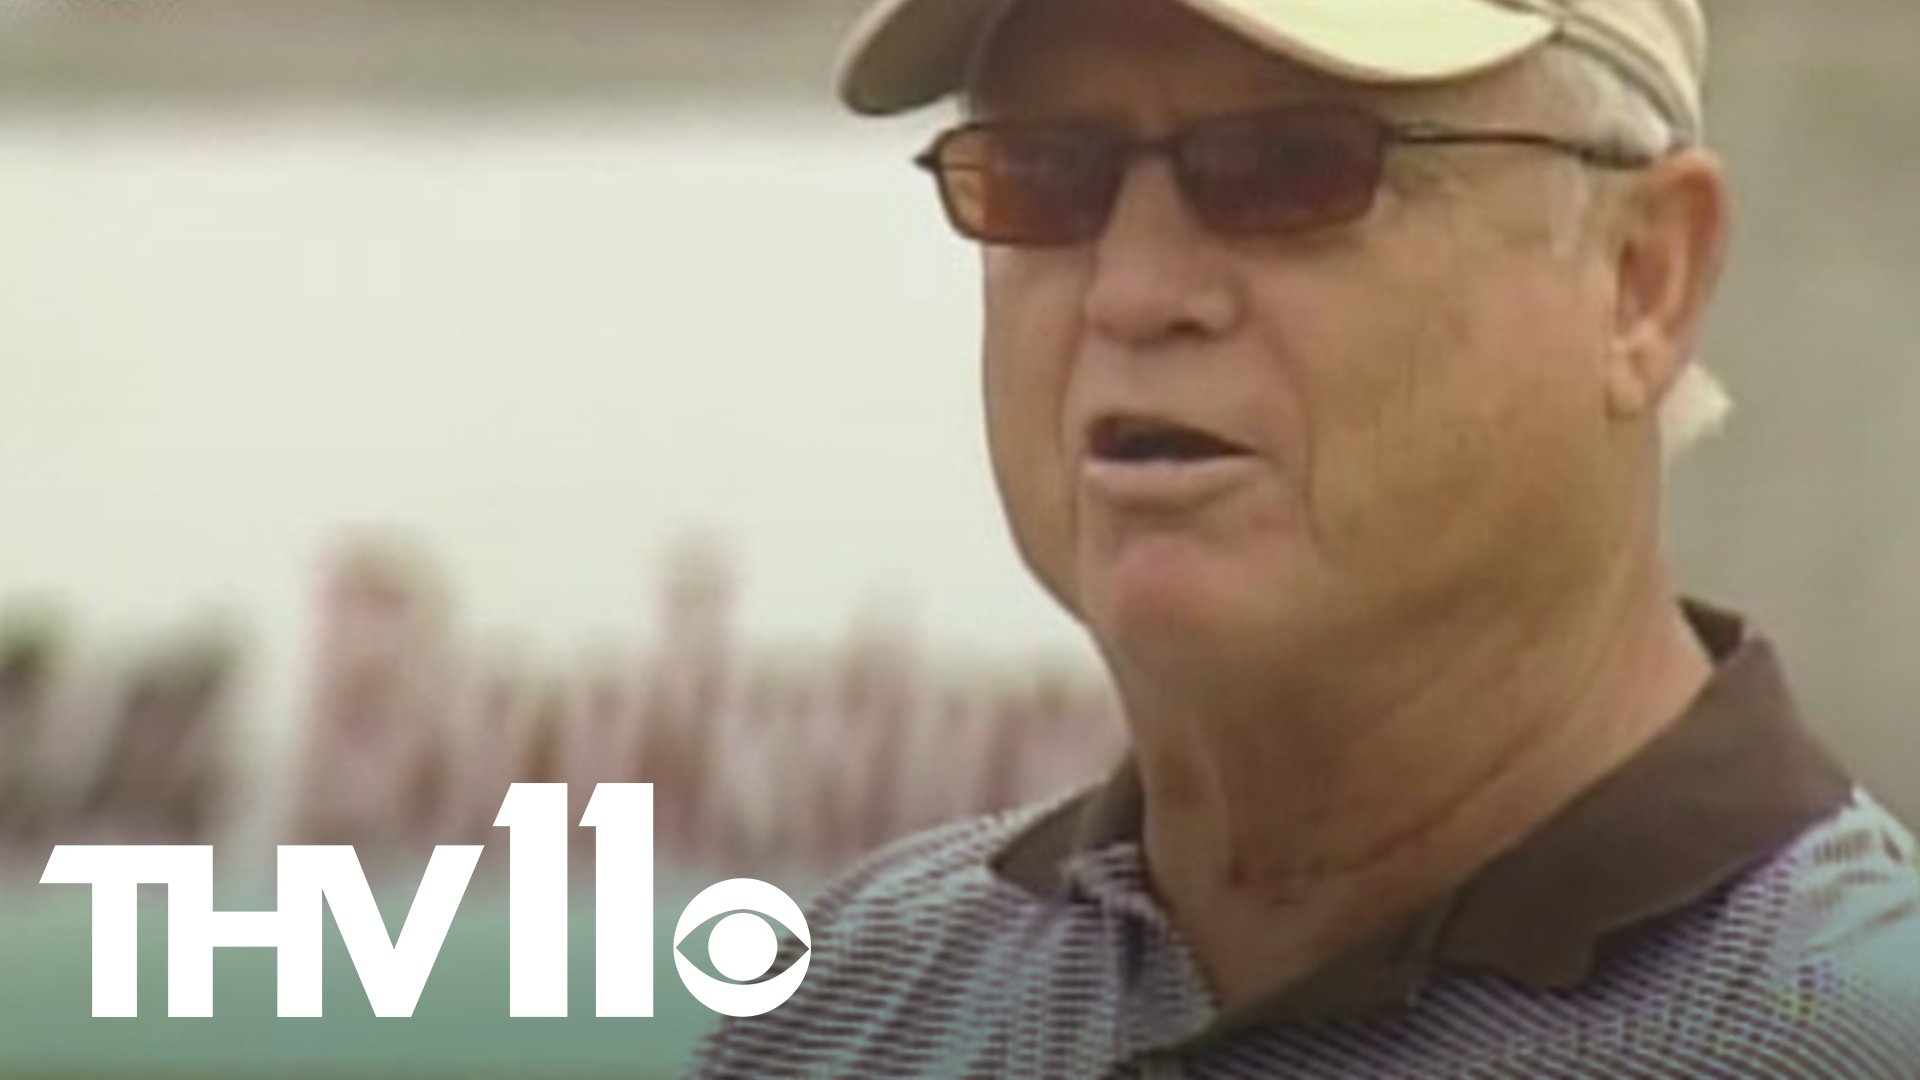 Larry Lacewell died on Wednesday morning. He was 85 years old.